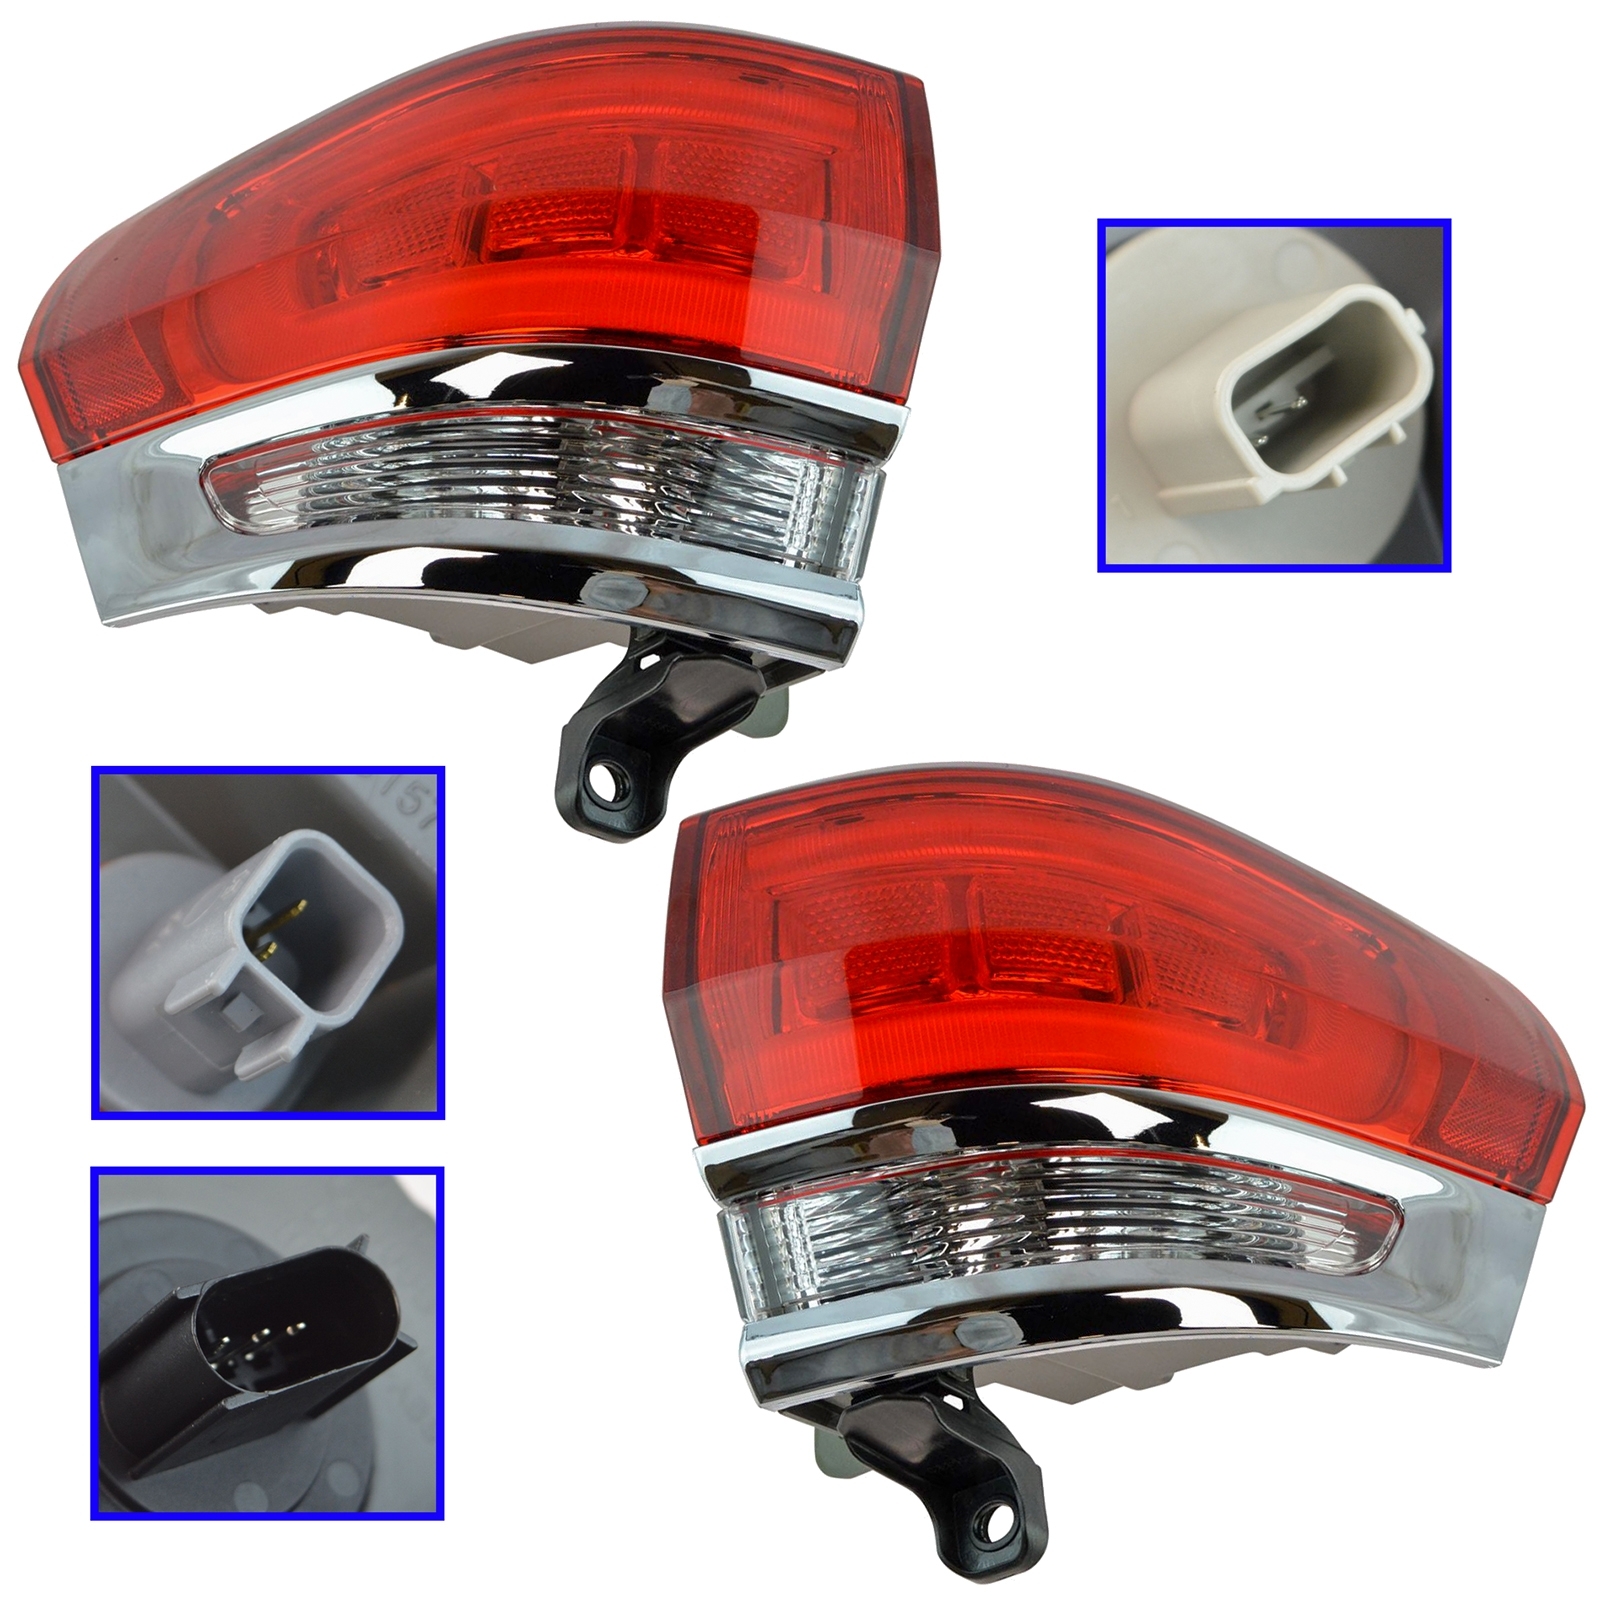 Diy Solutions 2 Piece Outer Tail Light Set For 14-19 Grand Cherokee, HWNV-LHT07968